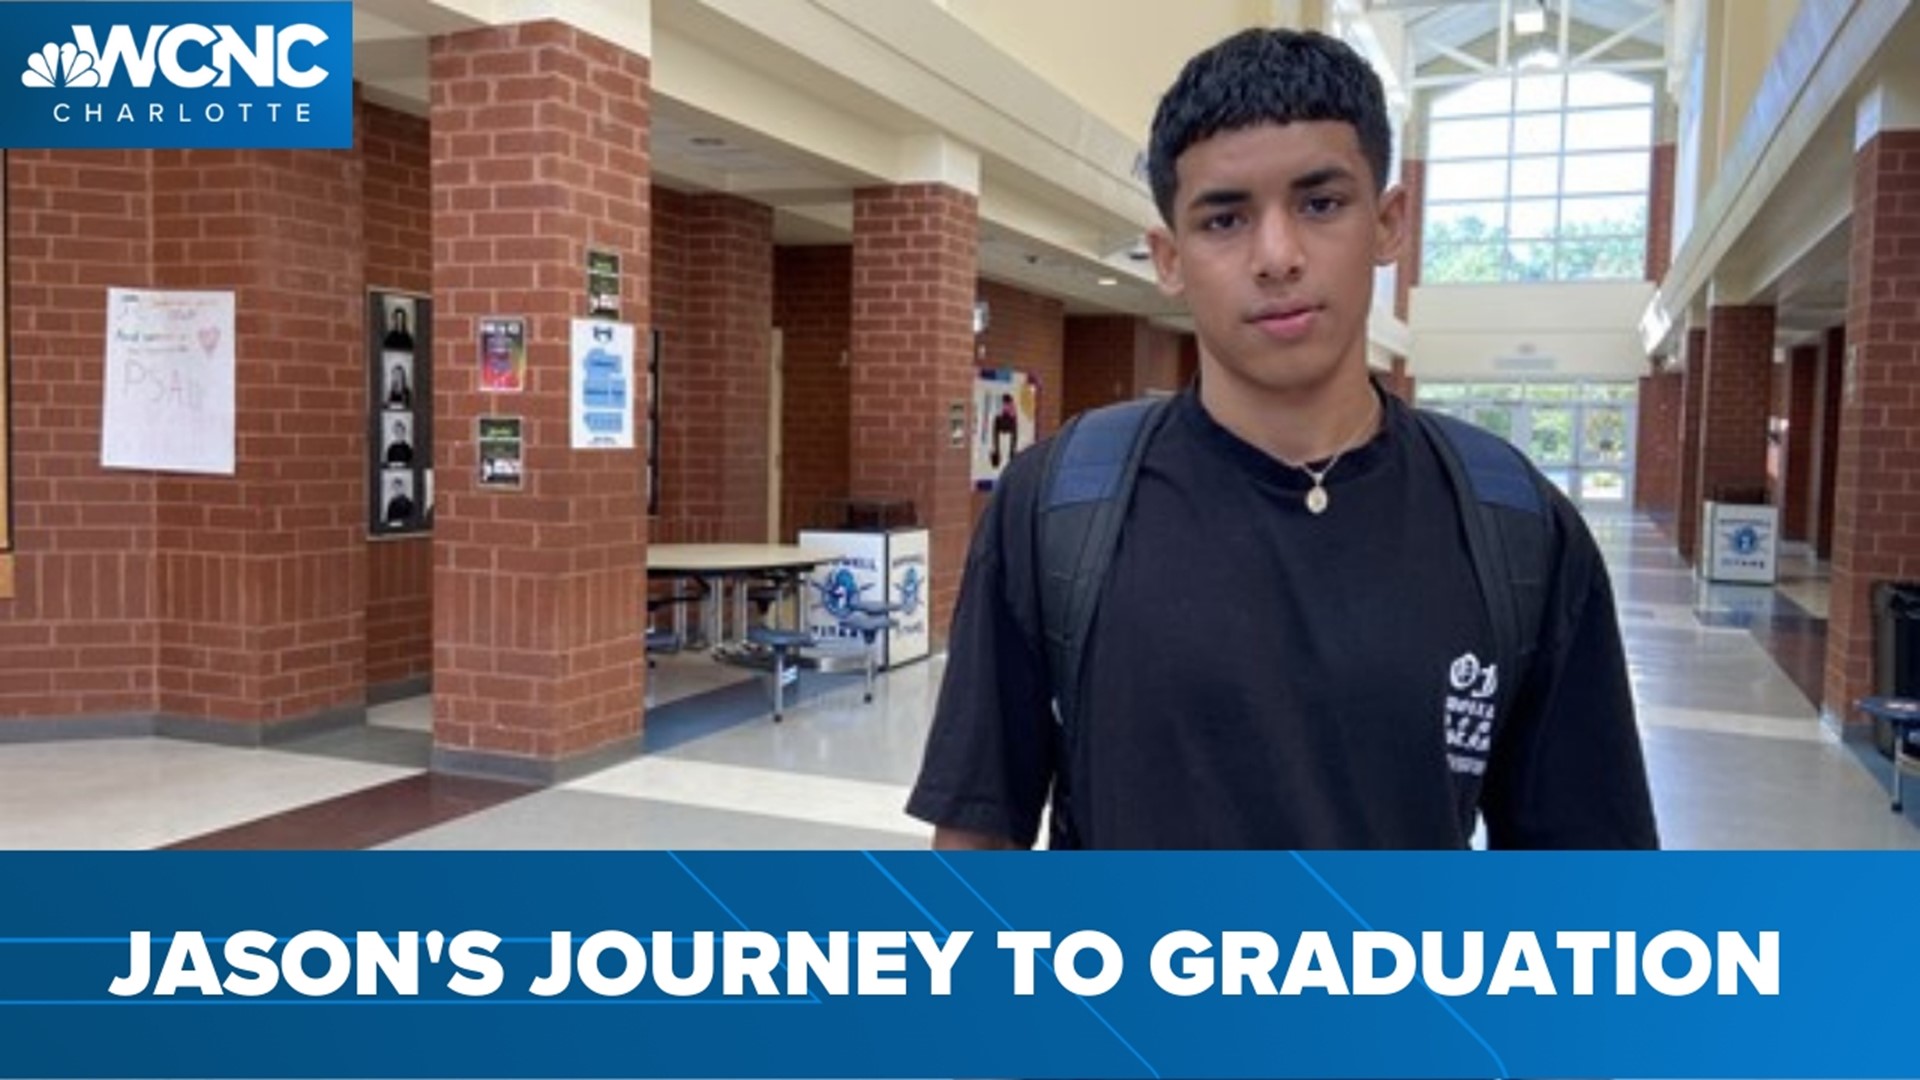 Jason Cerrato is a star soccer player, works a part-time job and has a 4.0 GPA.